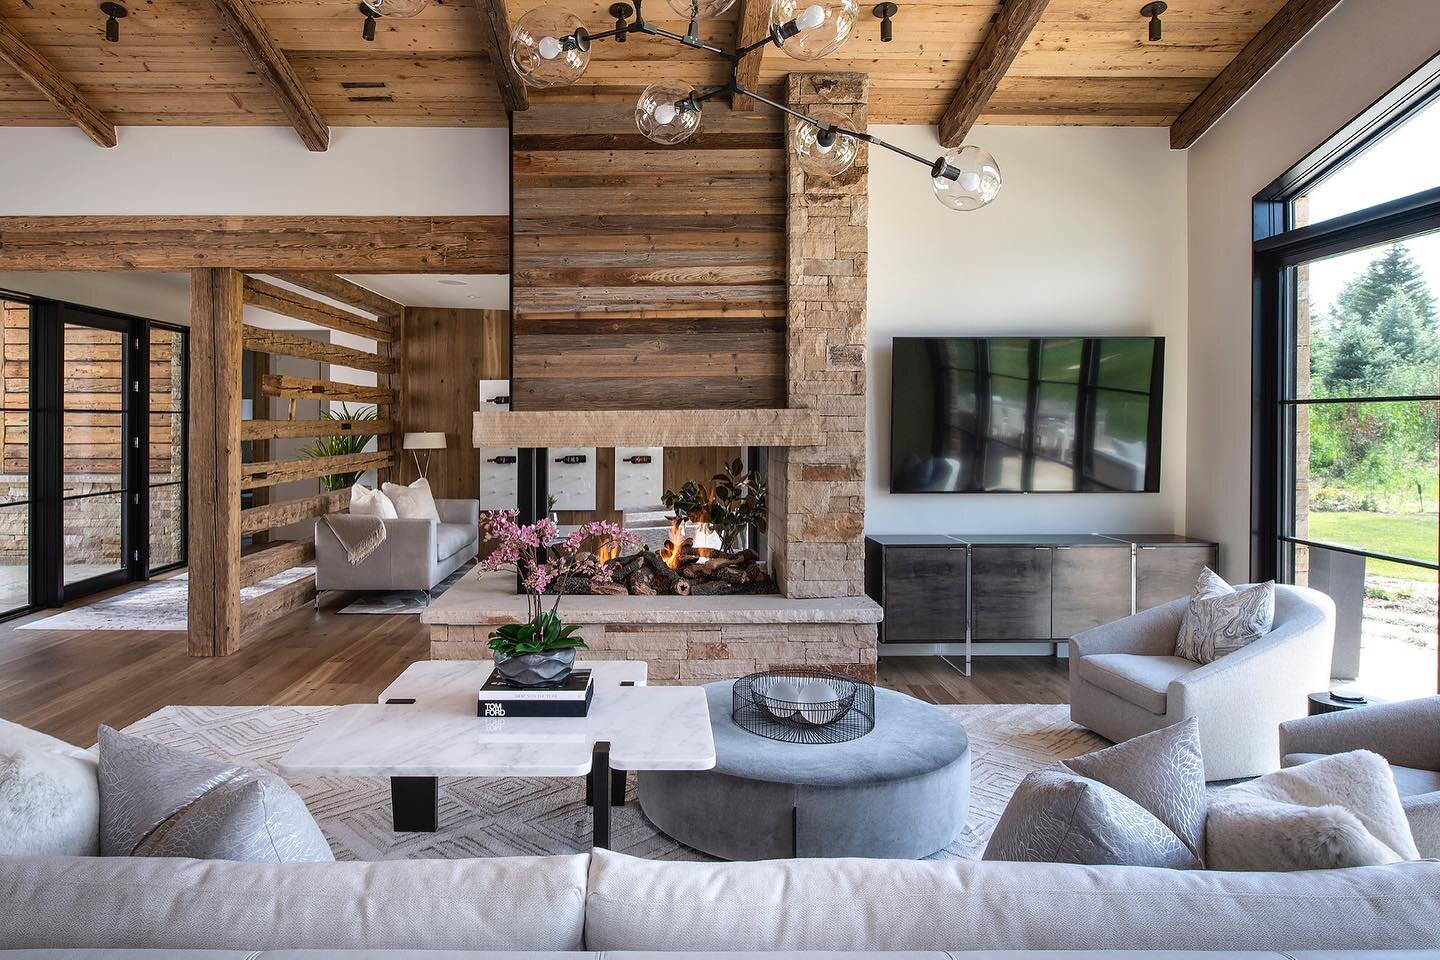 Beautiful usage of salvage wood in this rustic yet modern mountain home in Colorado shooting with @vailcustom and featuring an incredible collection from the ultimate curators of wood @arrigoniwoods  @fujifilmx_us #gfx100